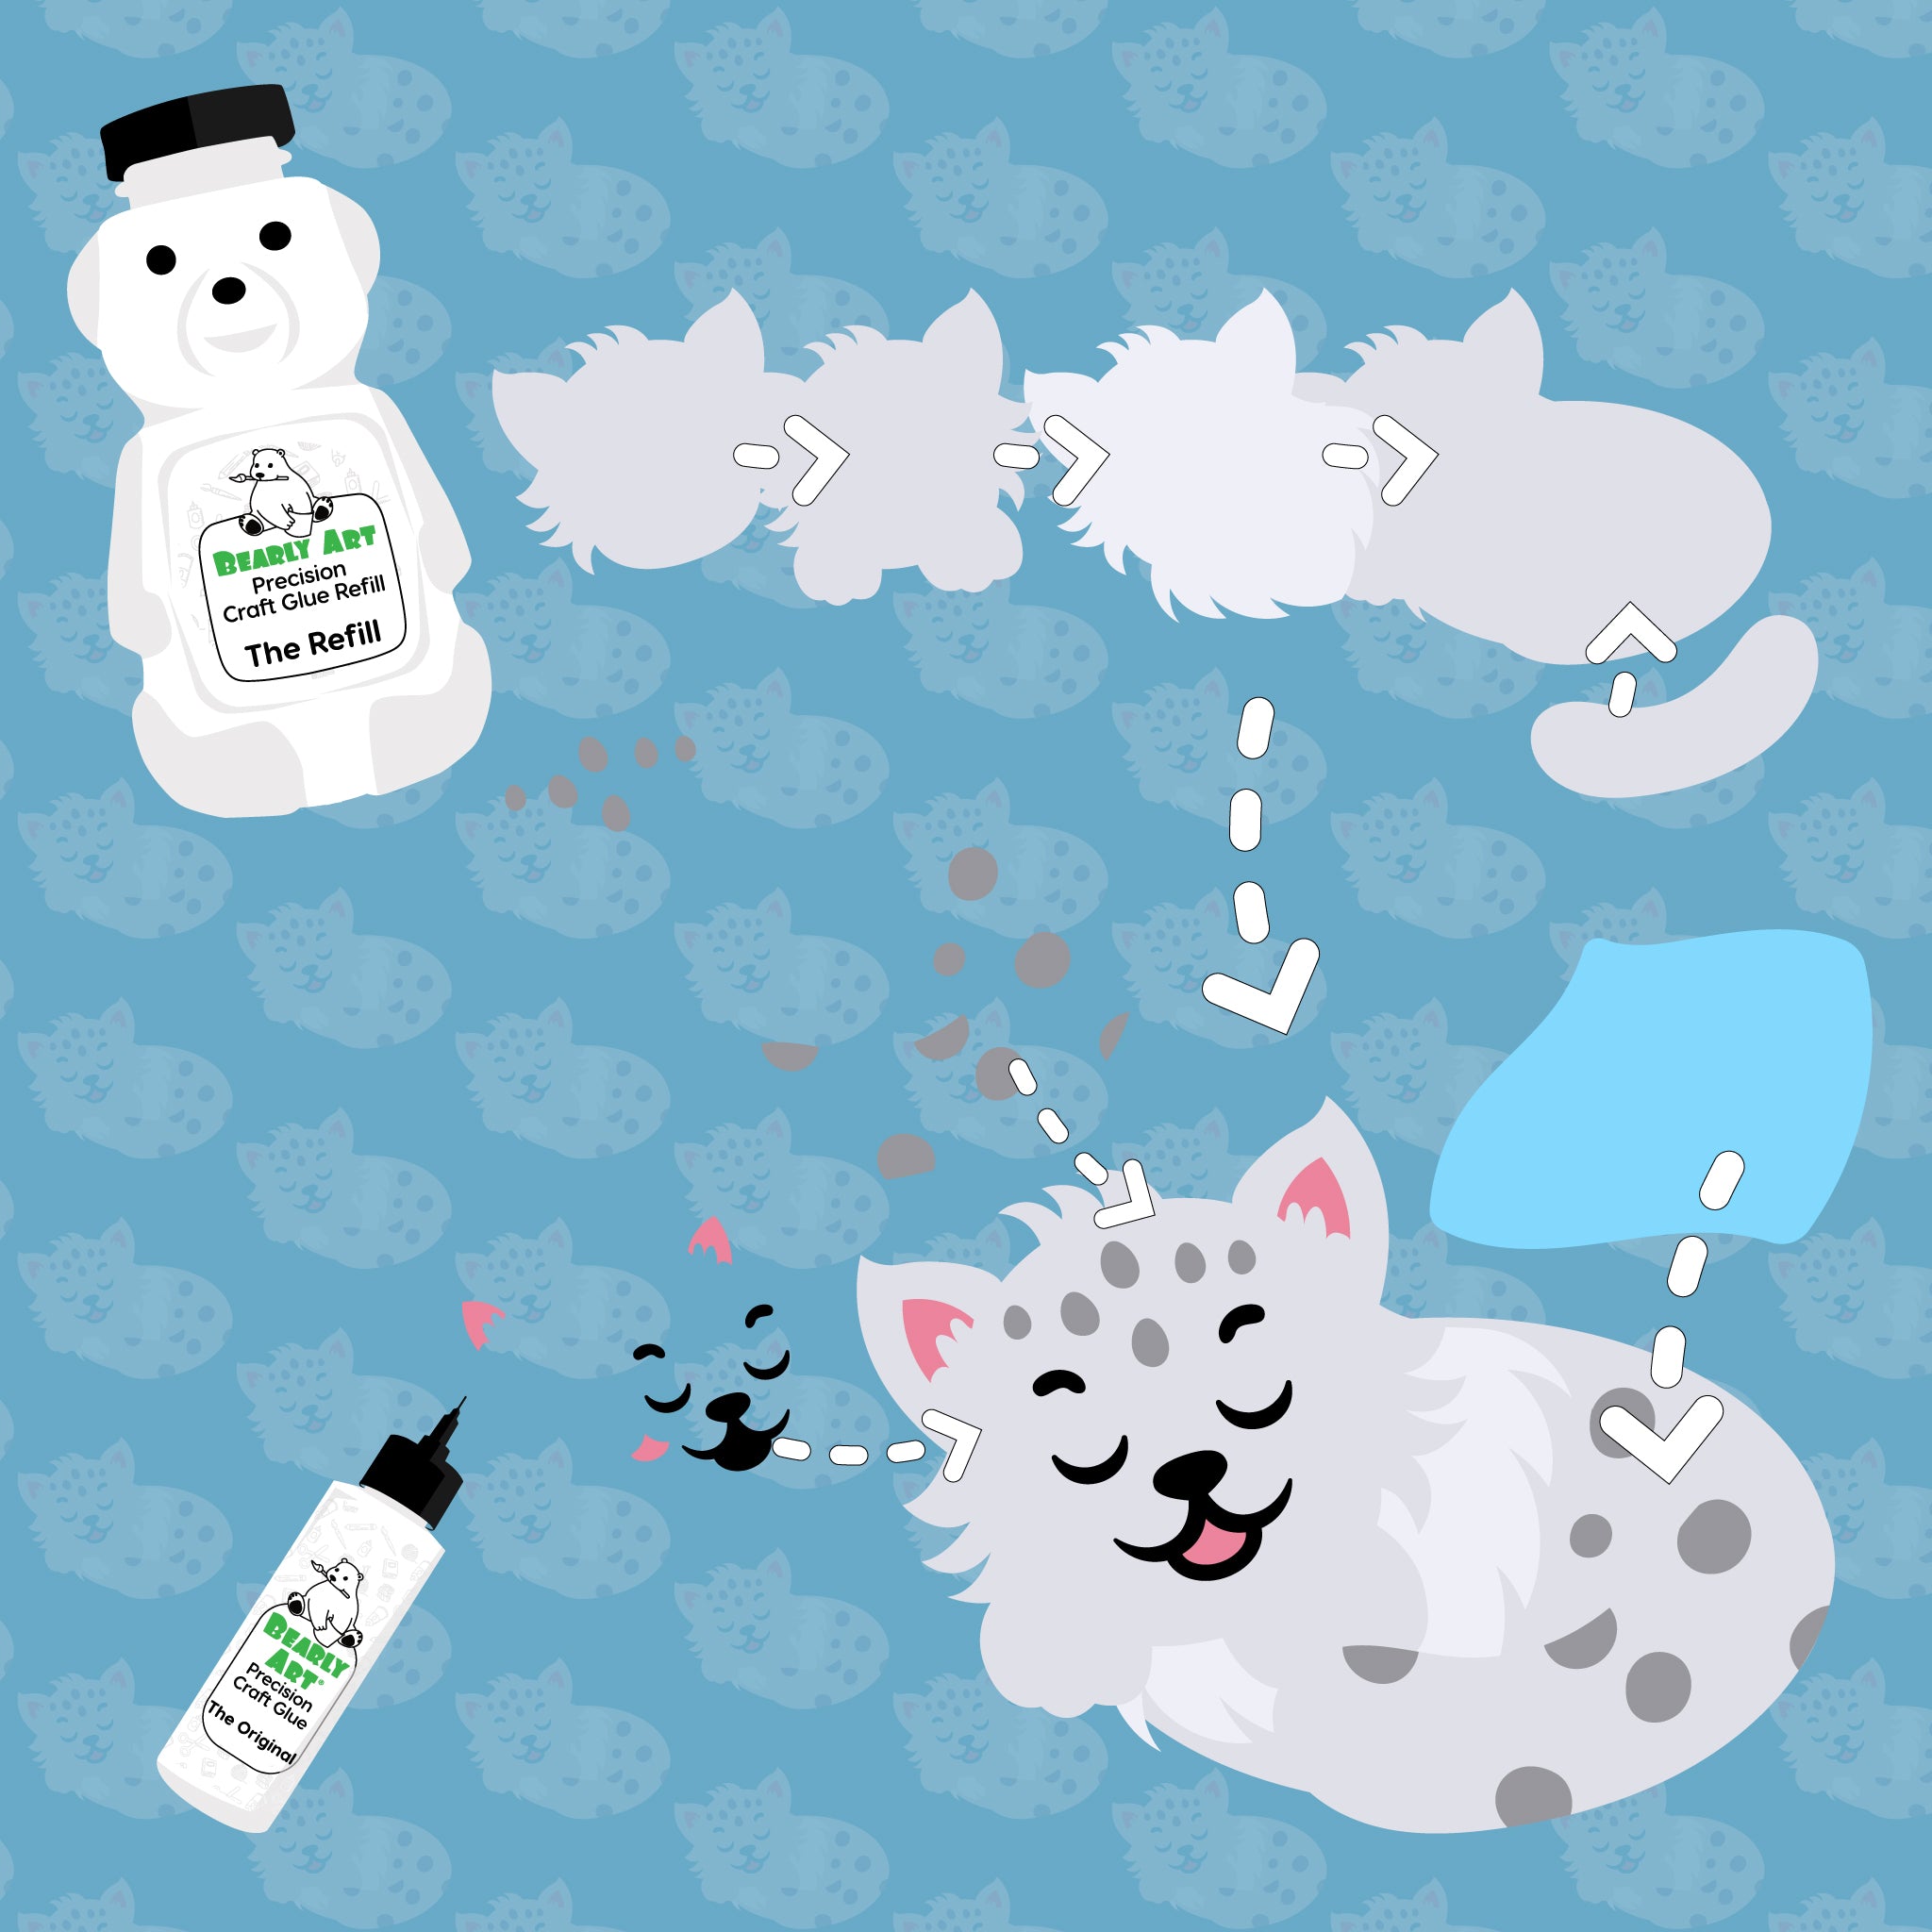 Sleeping Snow Leopard - Design Team 13 - Who Spots A Party